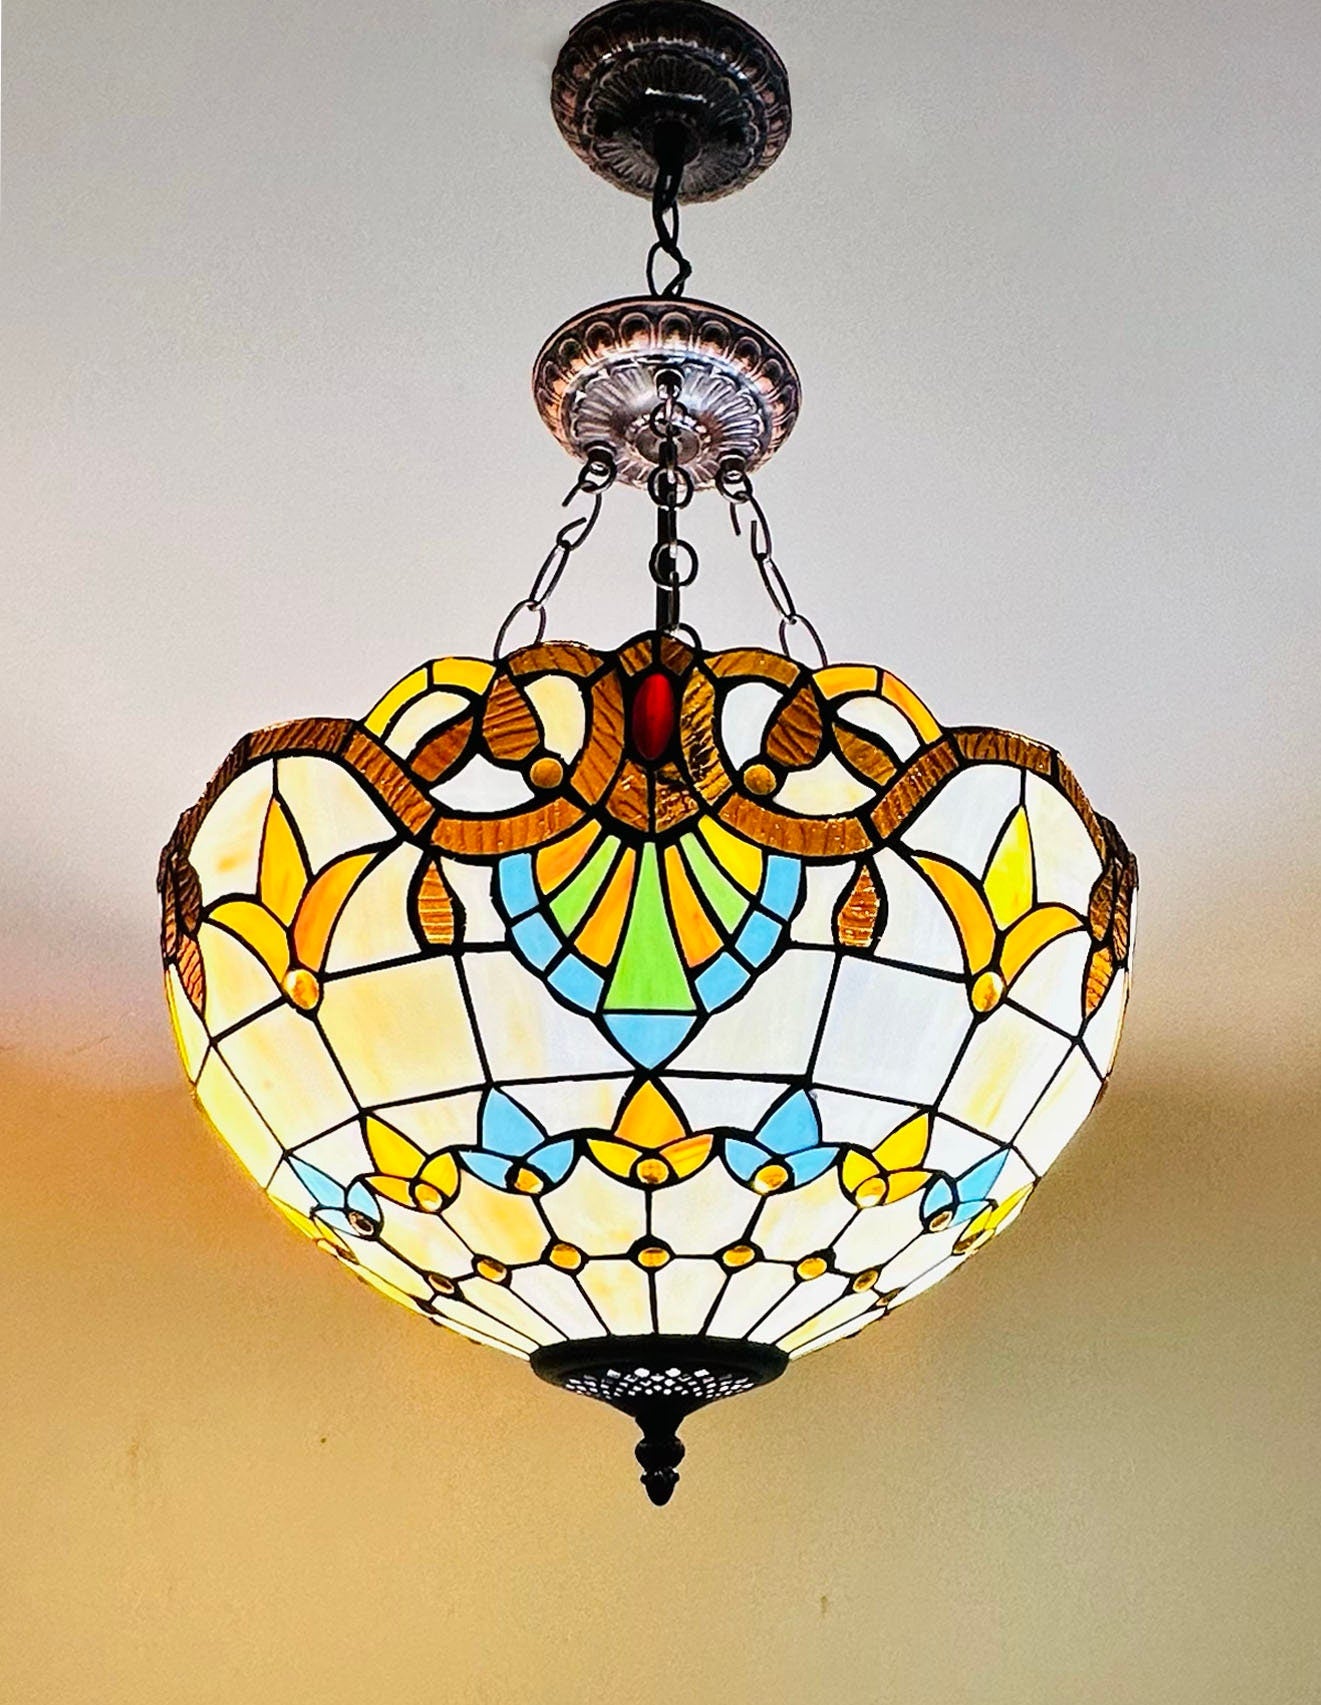 Crown Tiffany Inverted Lamp 16in, Leadglass Stained Glass Shade, Crystal Bead Lampshade, Chandelier, Pendant Light, Living Room Kitchen Lamp